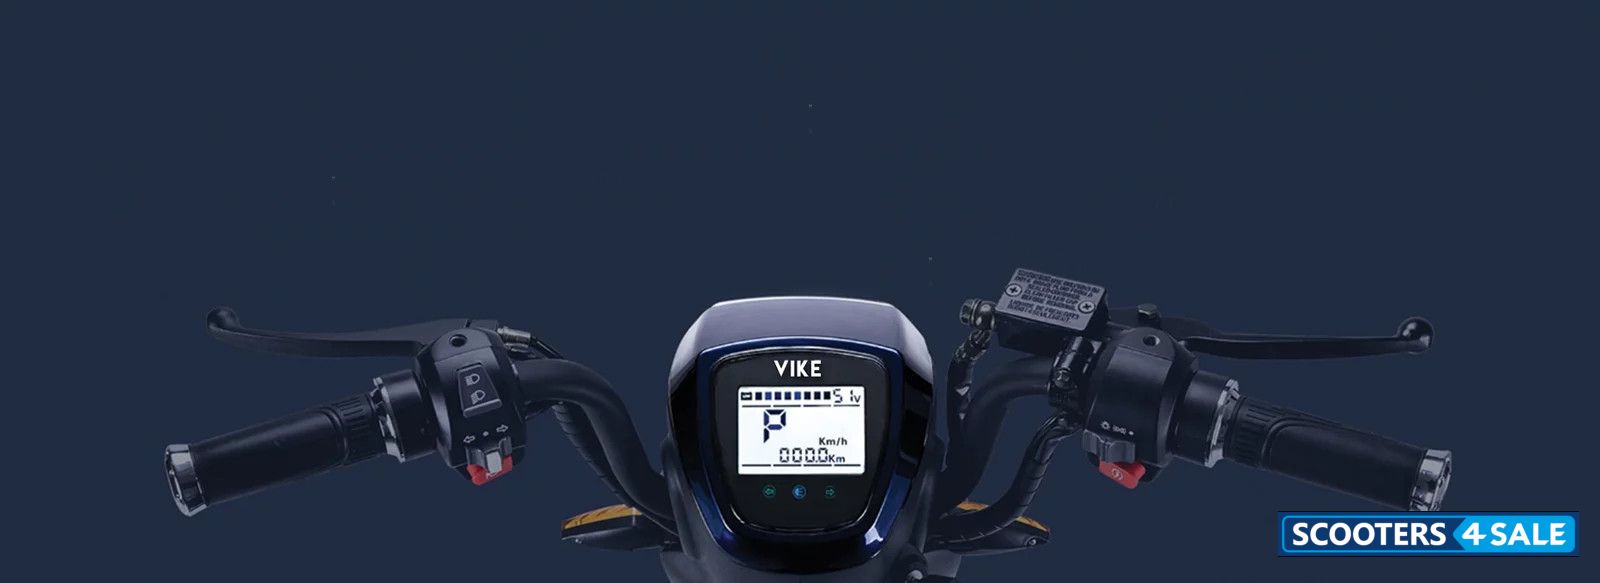 Vike Faster - LCD Instrument Display